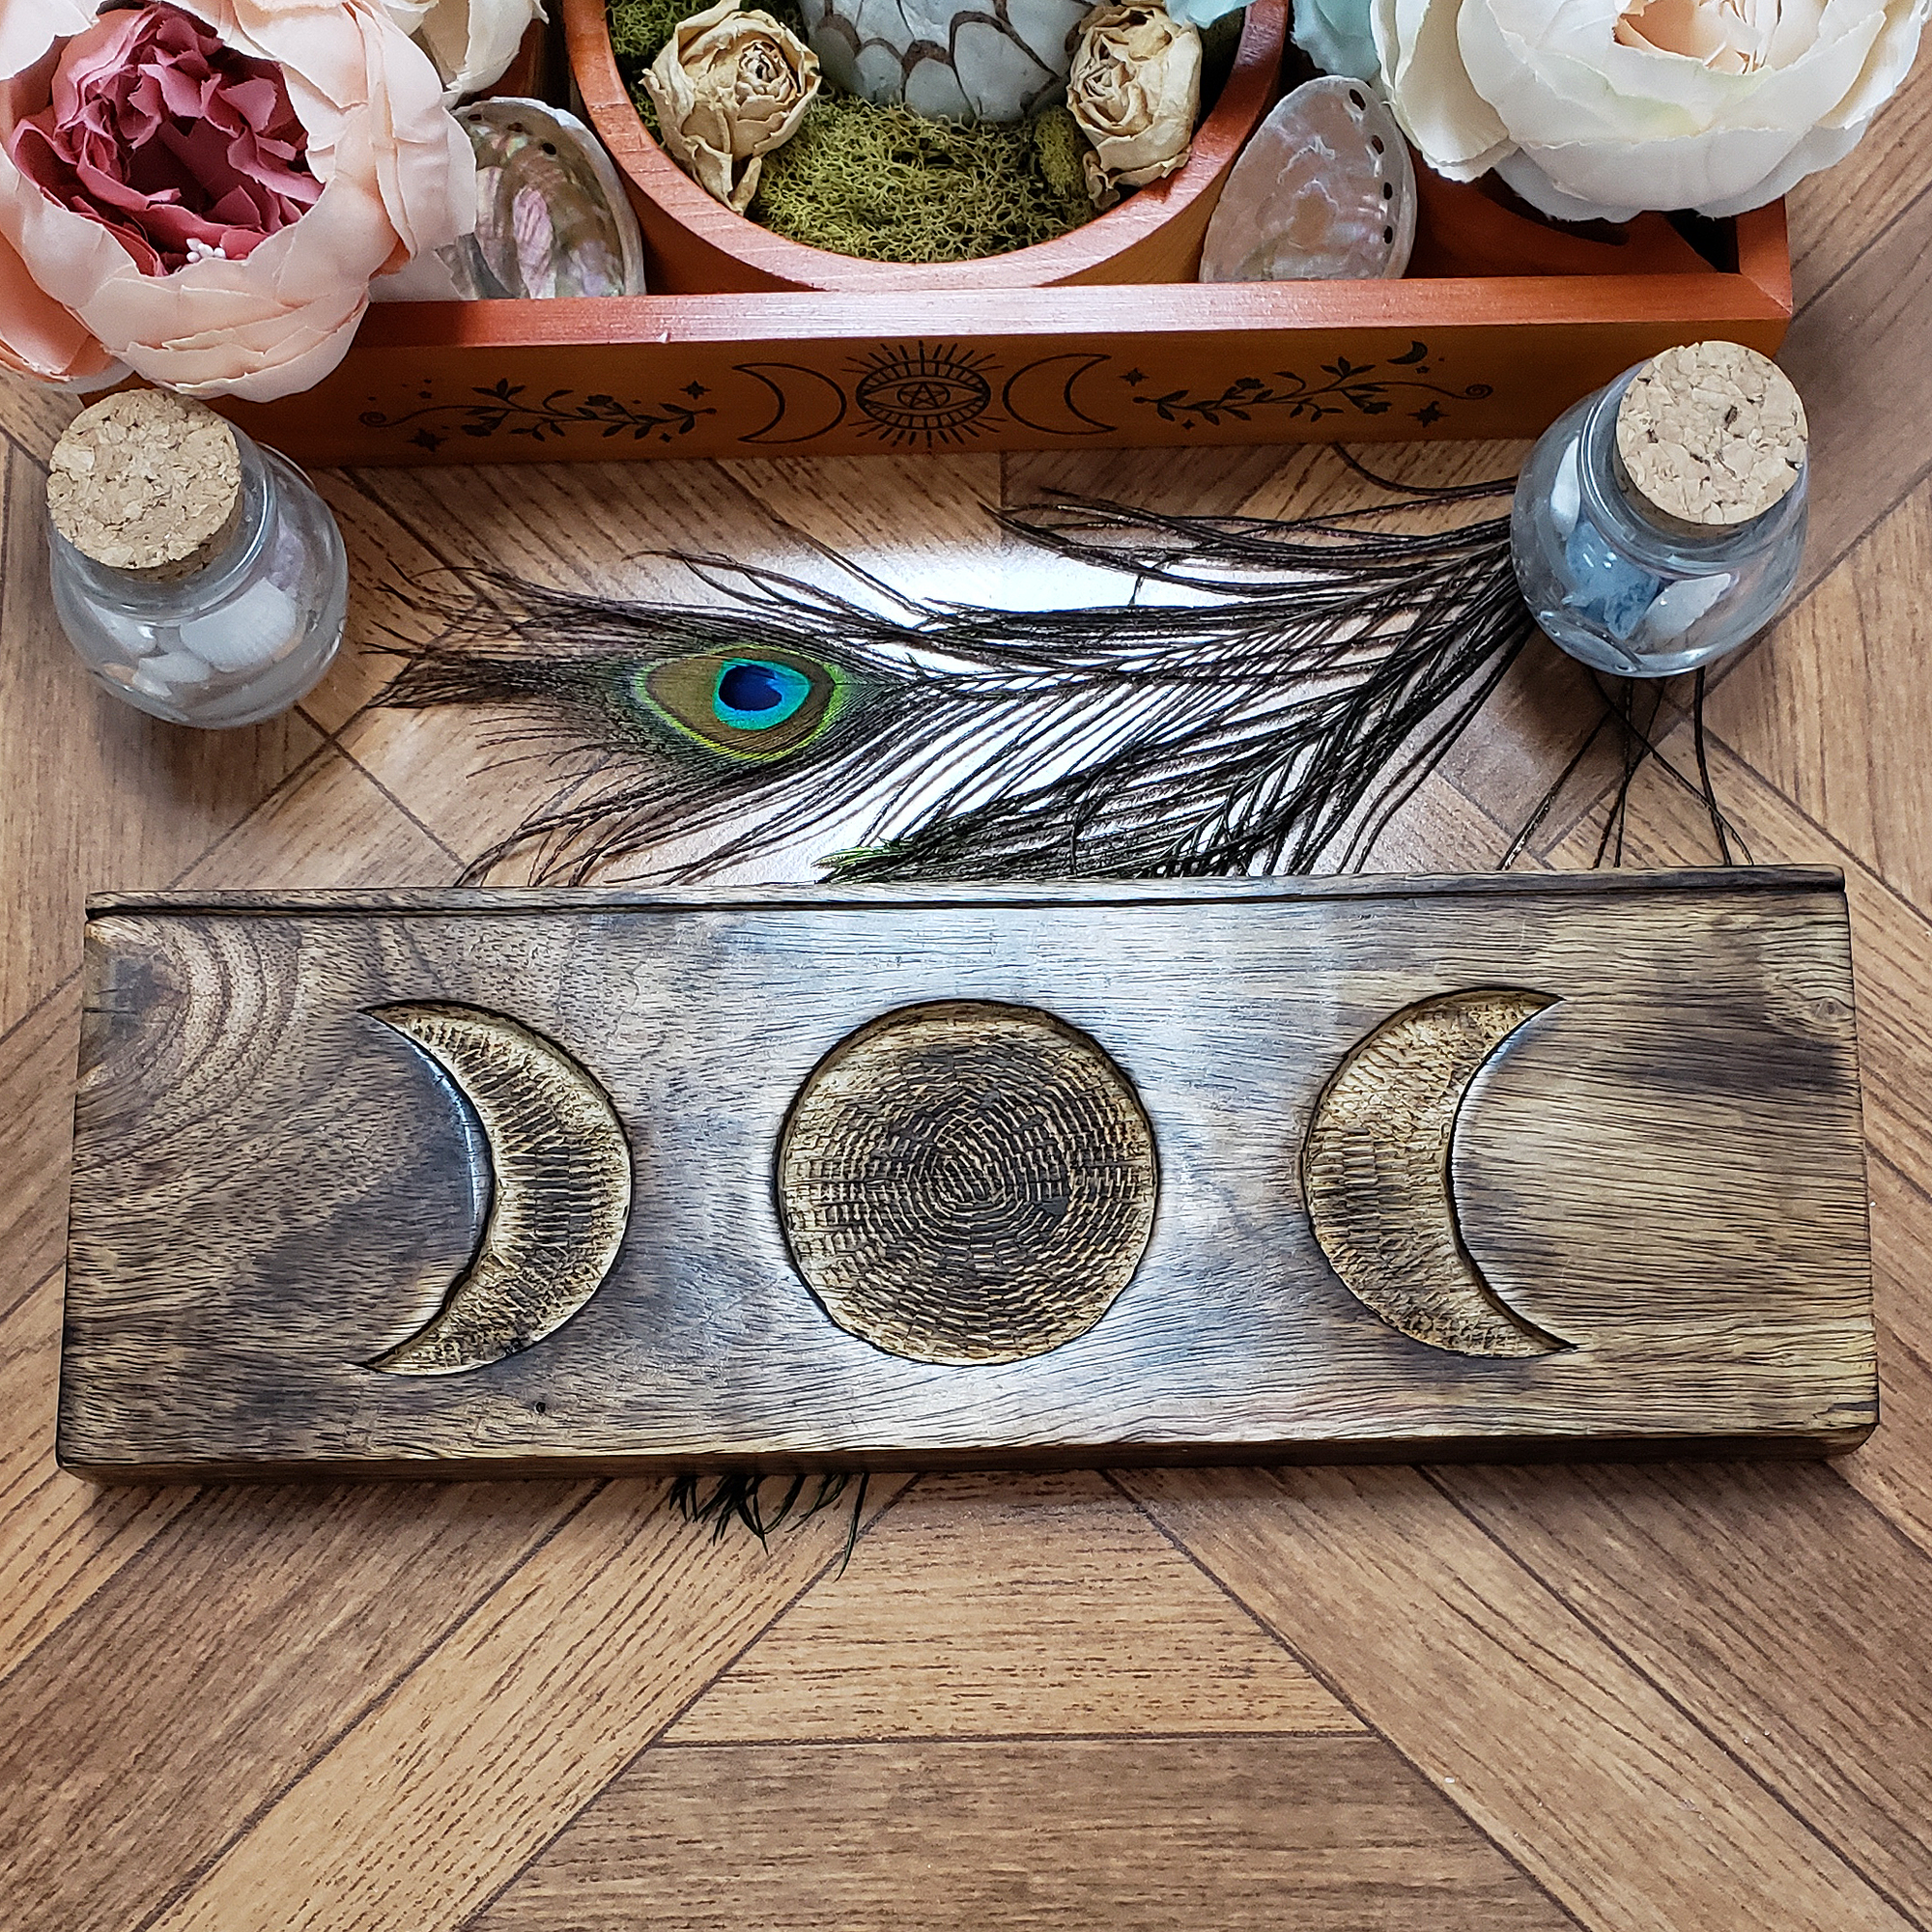 Triple Moon Rustic Wooden Display Stand for Tarot Cards, Crystals, Jewelry, & More - 2